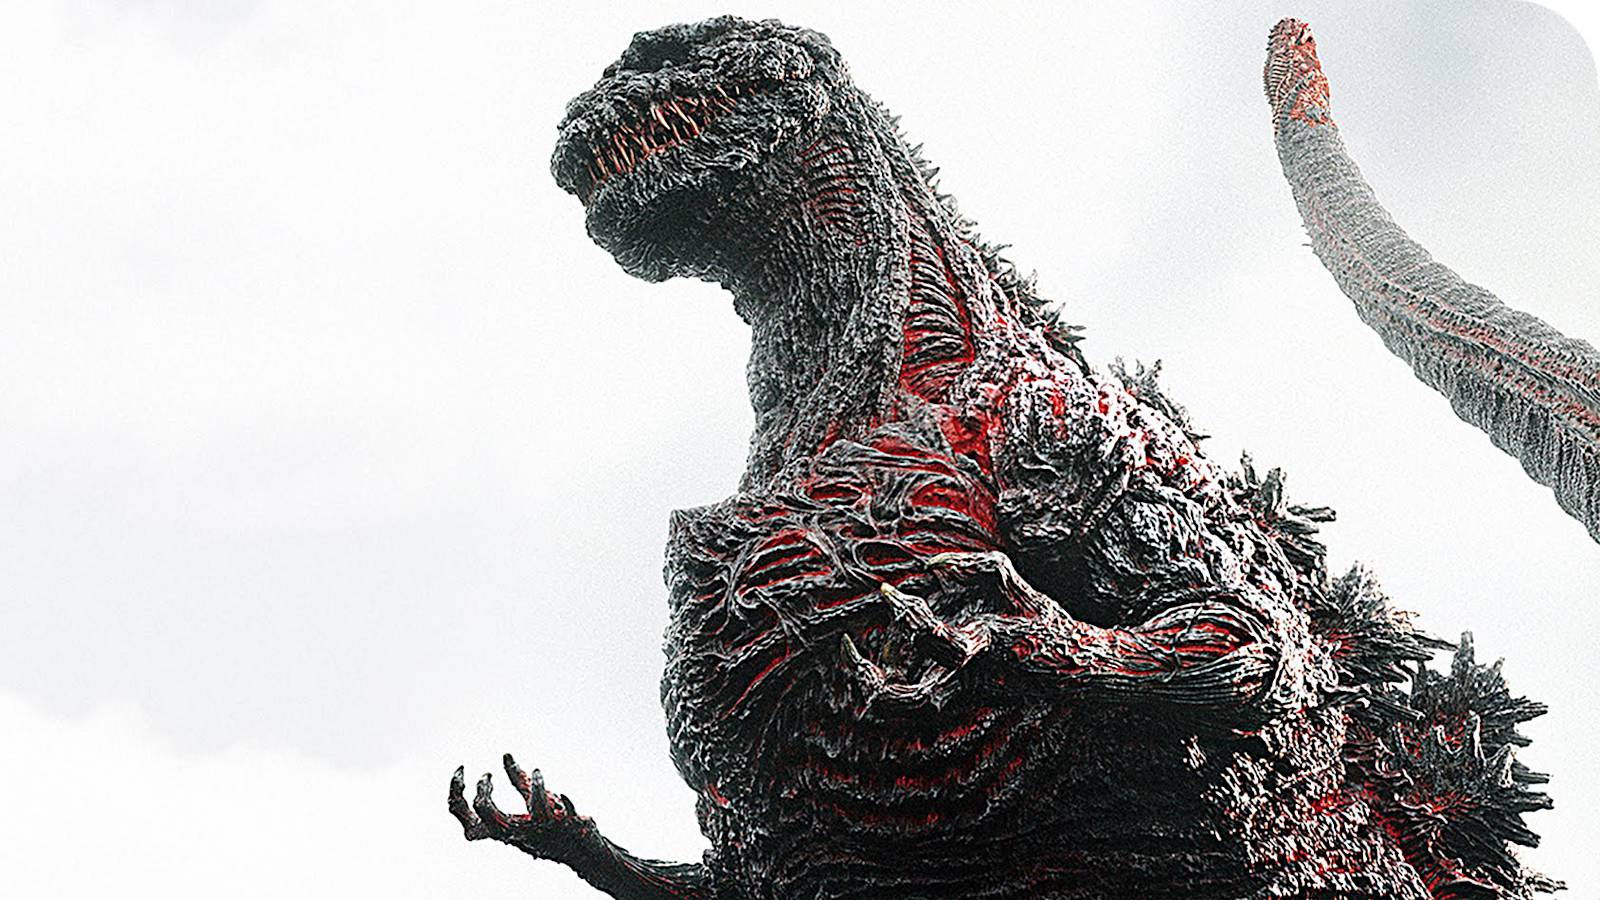 The 12 Best Kaiju Movies of All Time, Ranked